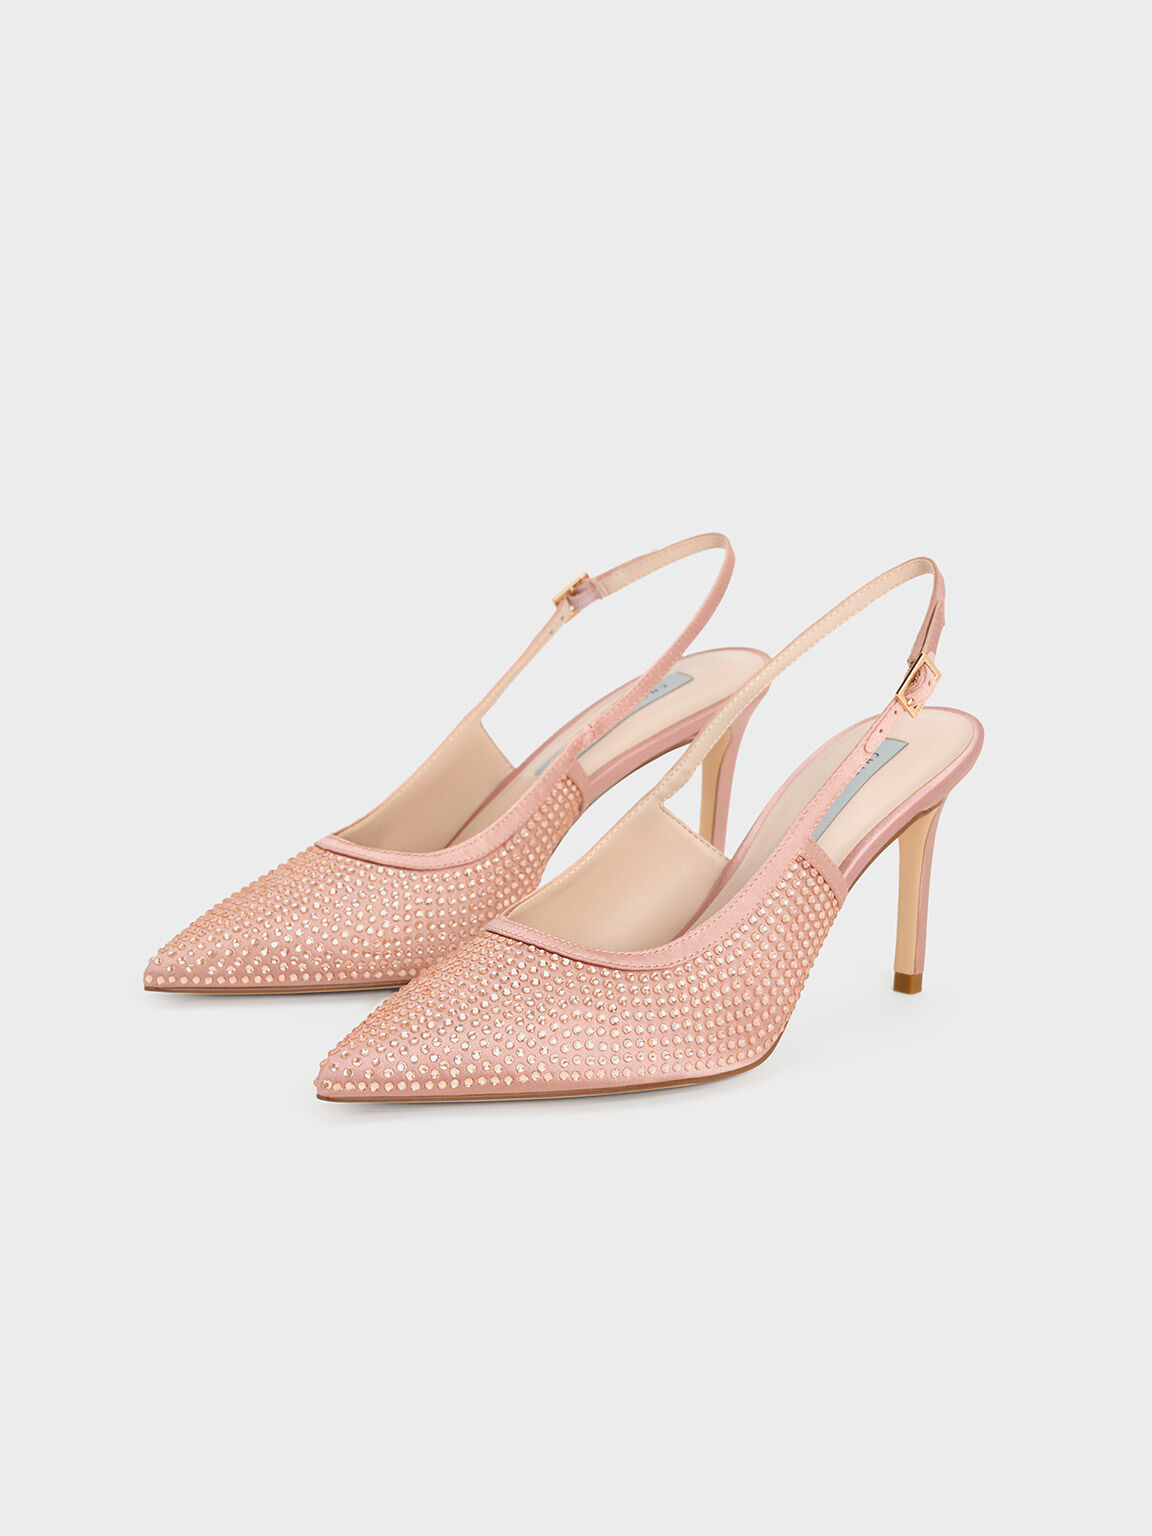 Nude Heels to Wear to Every Fall Wedding on Your Calendar | Us Weekly